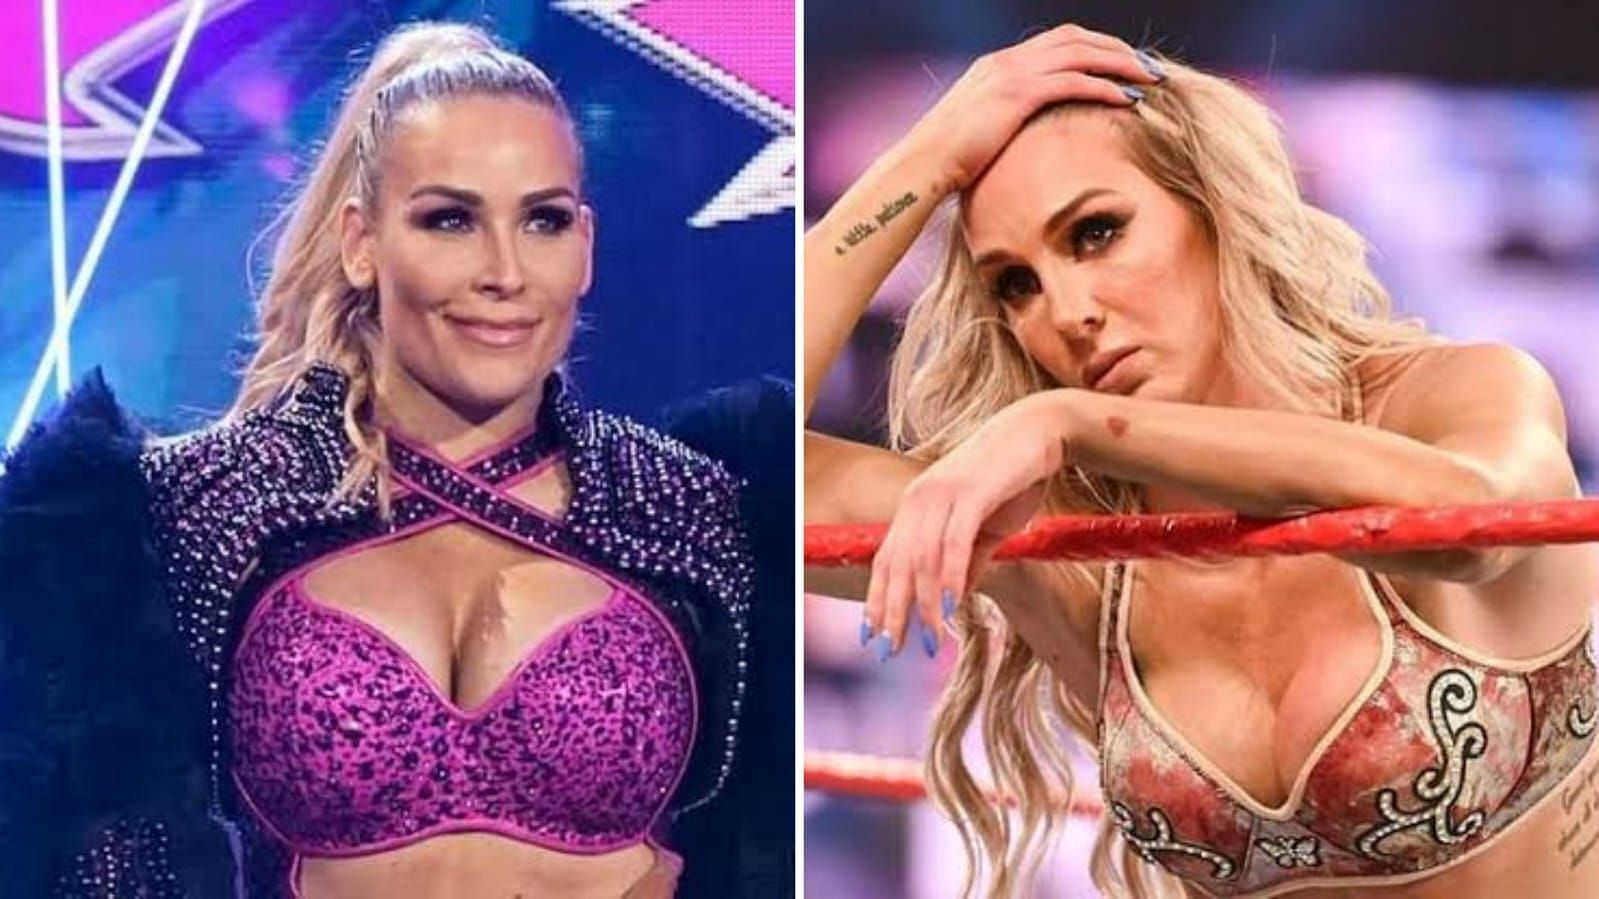 Charlotte Flair and Natalya are no strangers to each other.